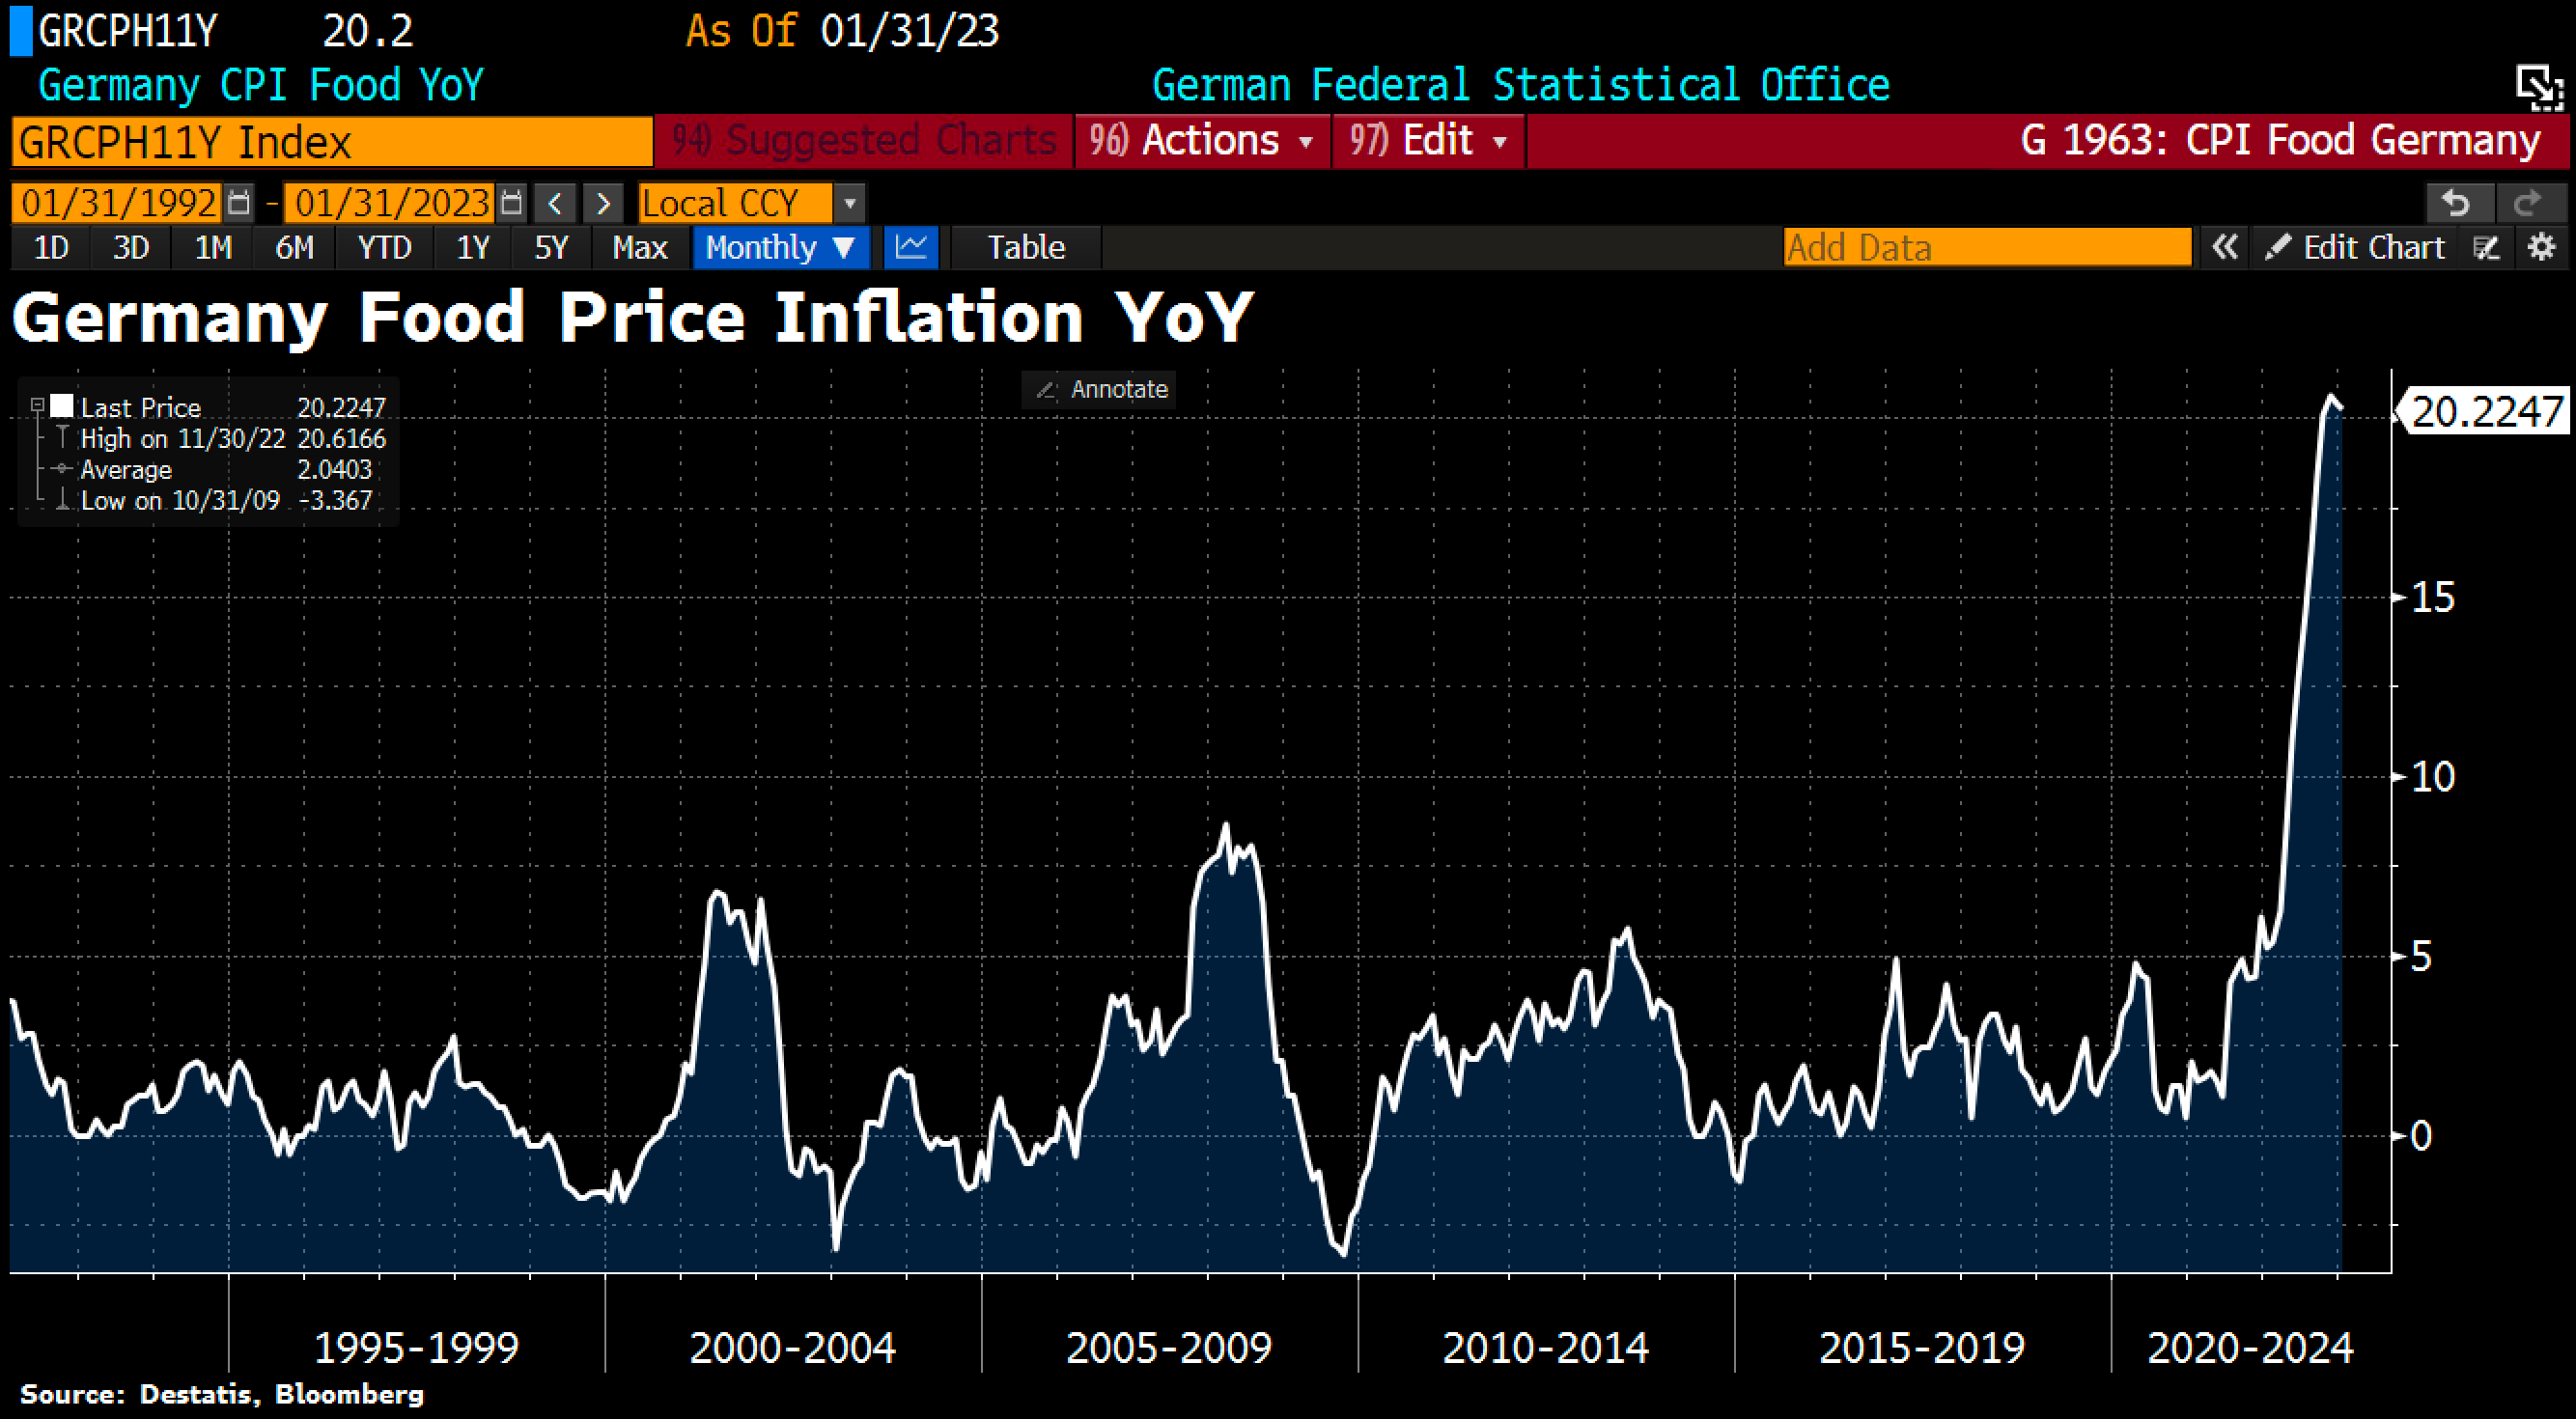 German Food CPI jumped 20.2% YoY in January